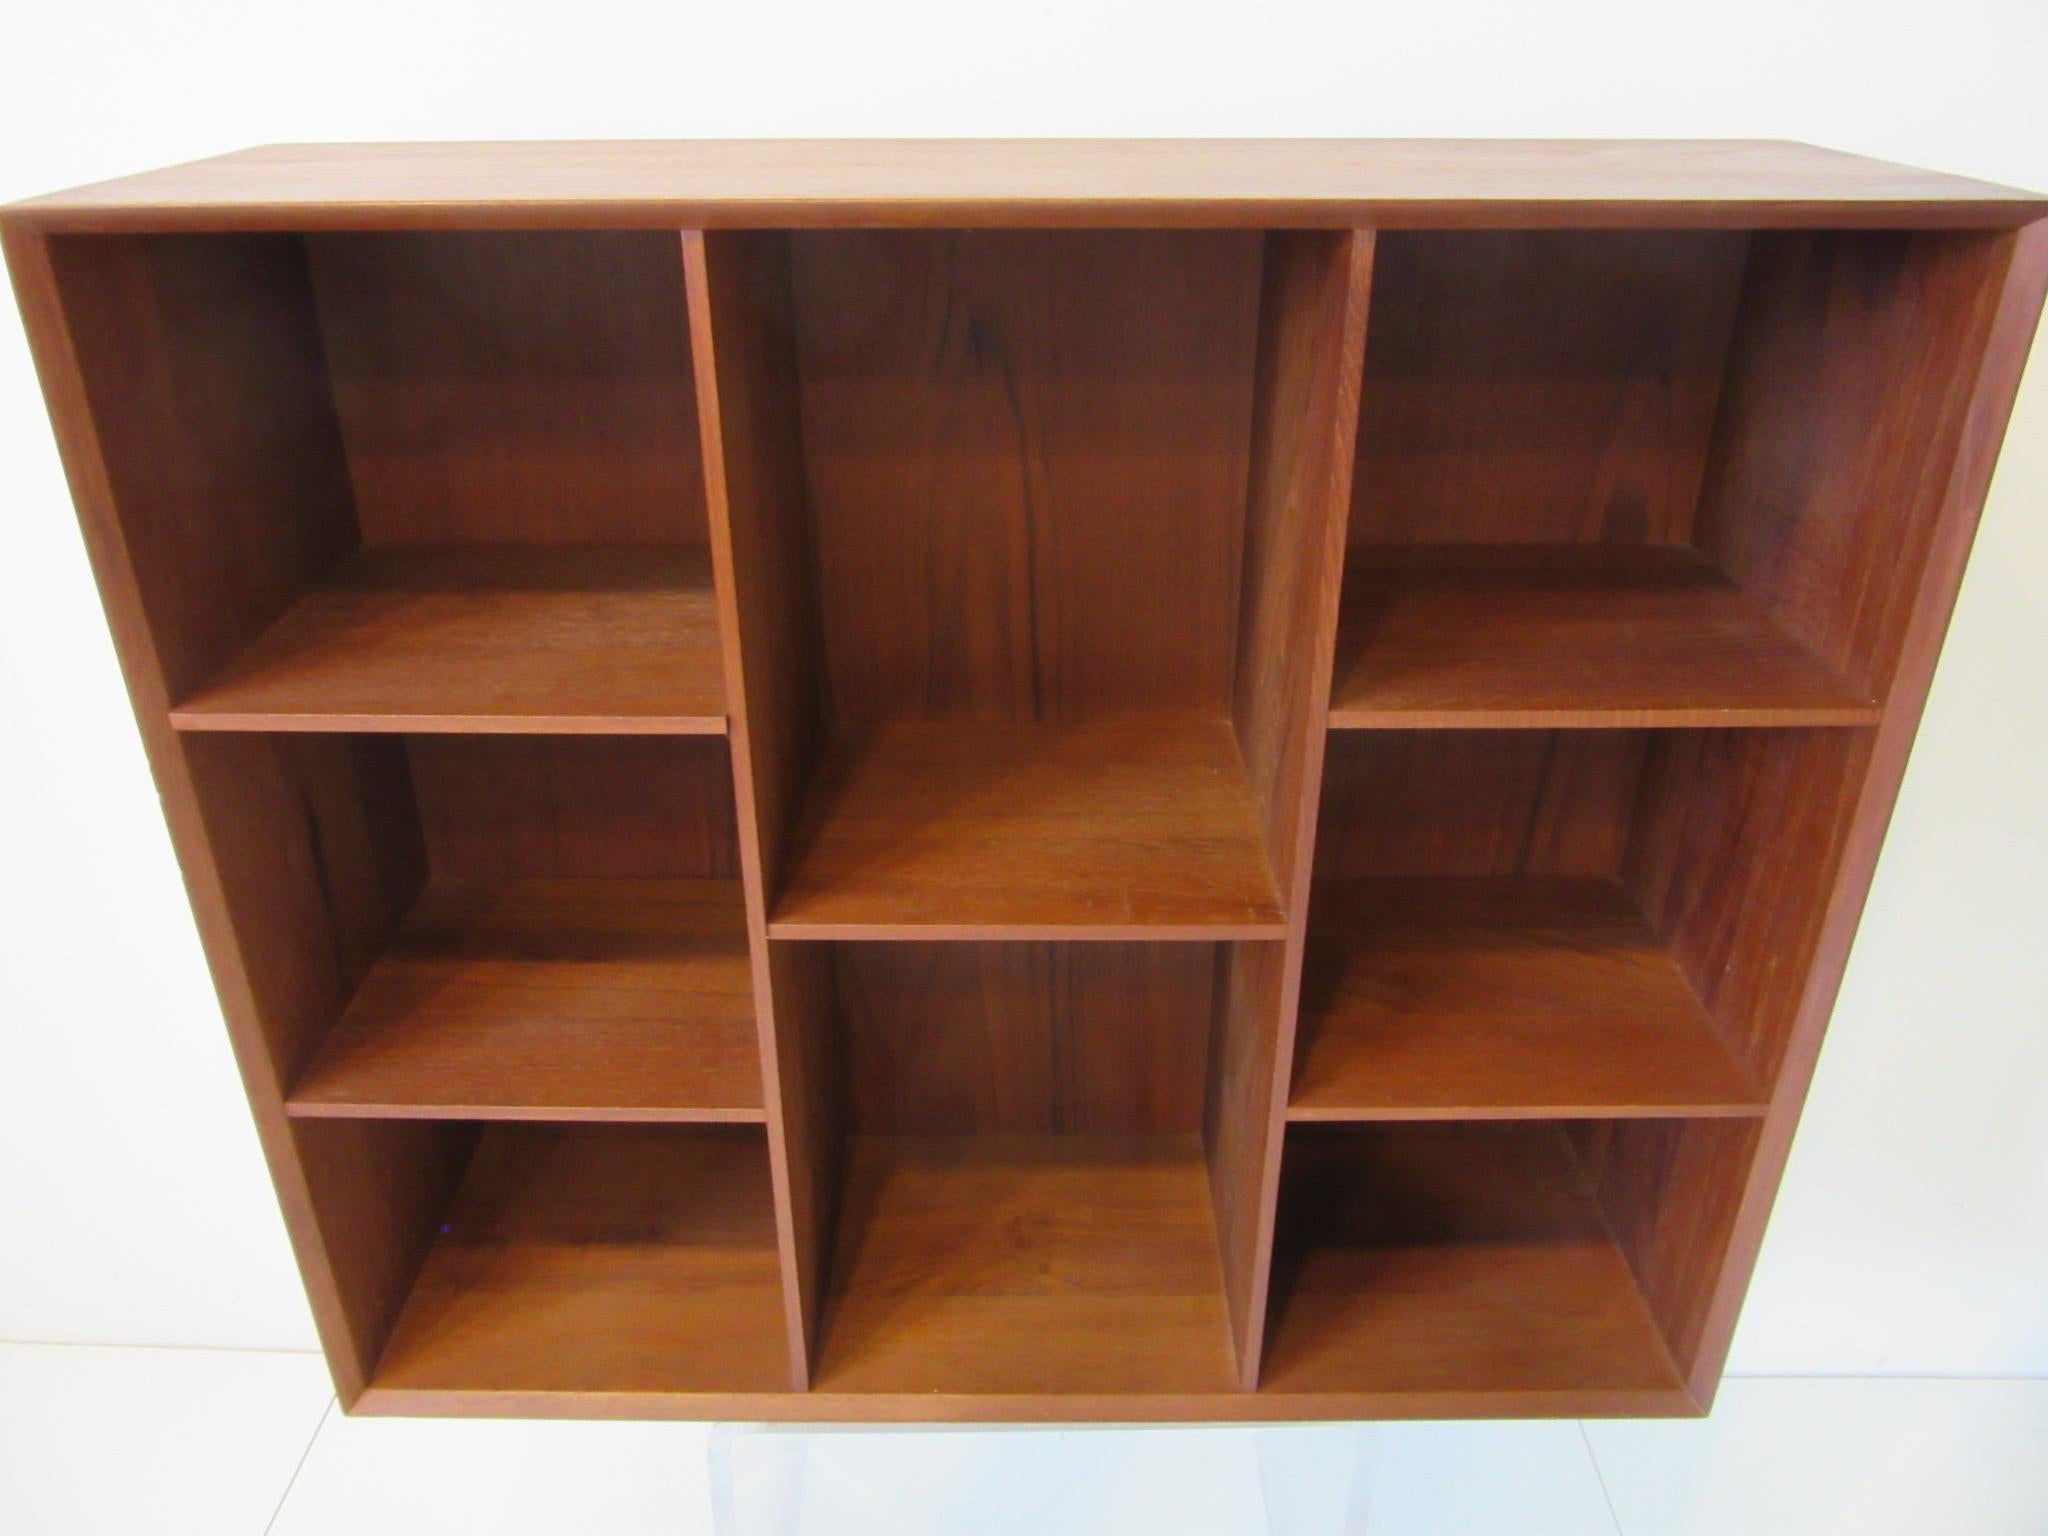 A well crafted teakwood bookcase with adjustable shelves to each side, a fixed shelve to the center and wonderful finger joinery to the corners and beveled front edges . Constructed at the height of handmade Danish Modernism's best period it can be